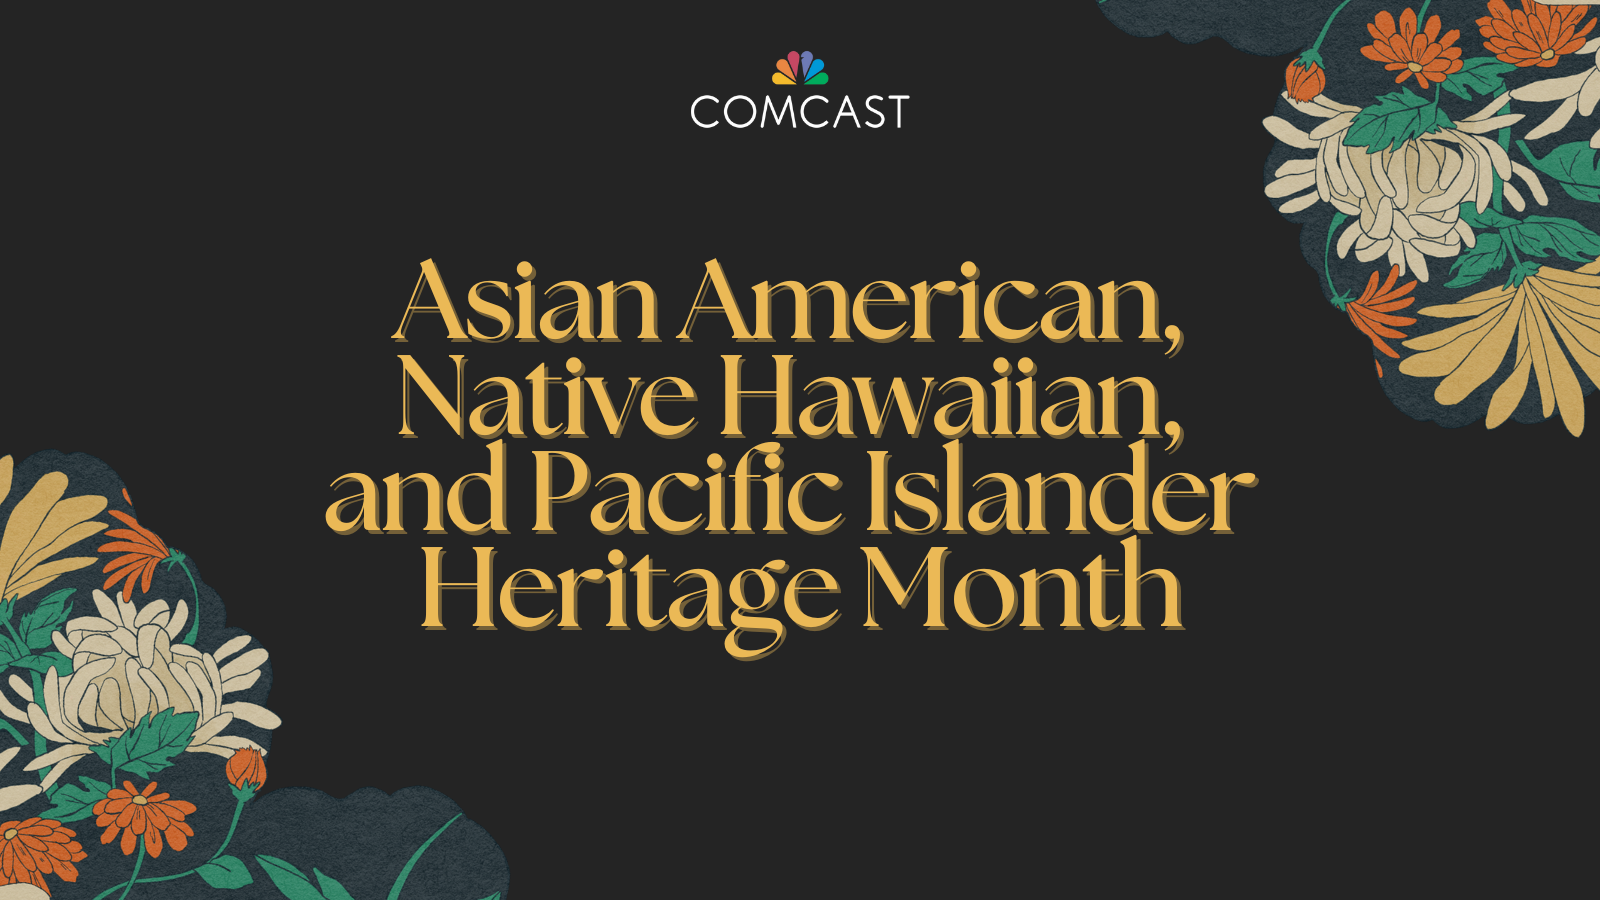 Comcast Celebrates Asian American, Native Hawaiian, and Pacific Islander Heritage Month